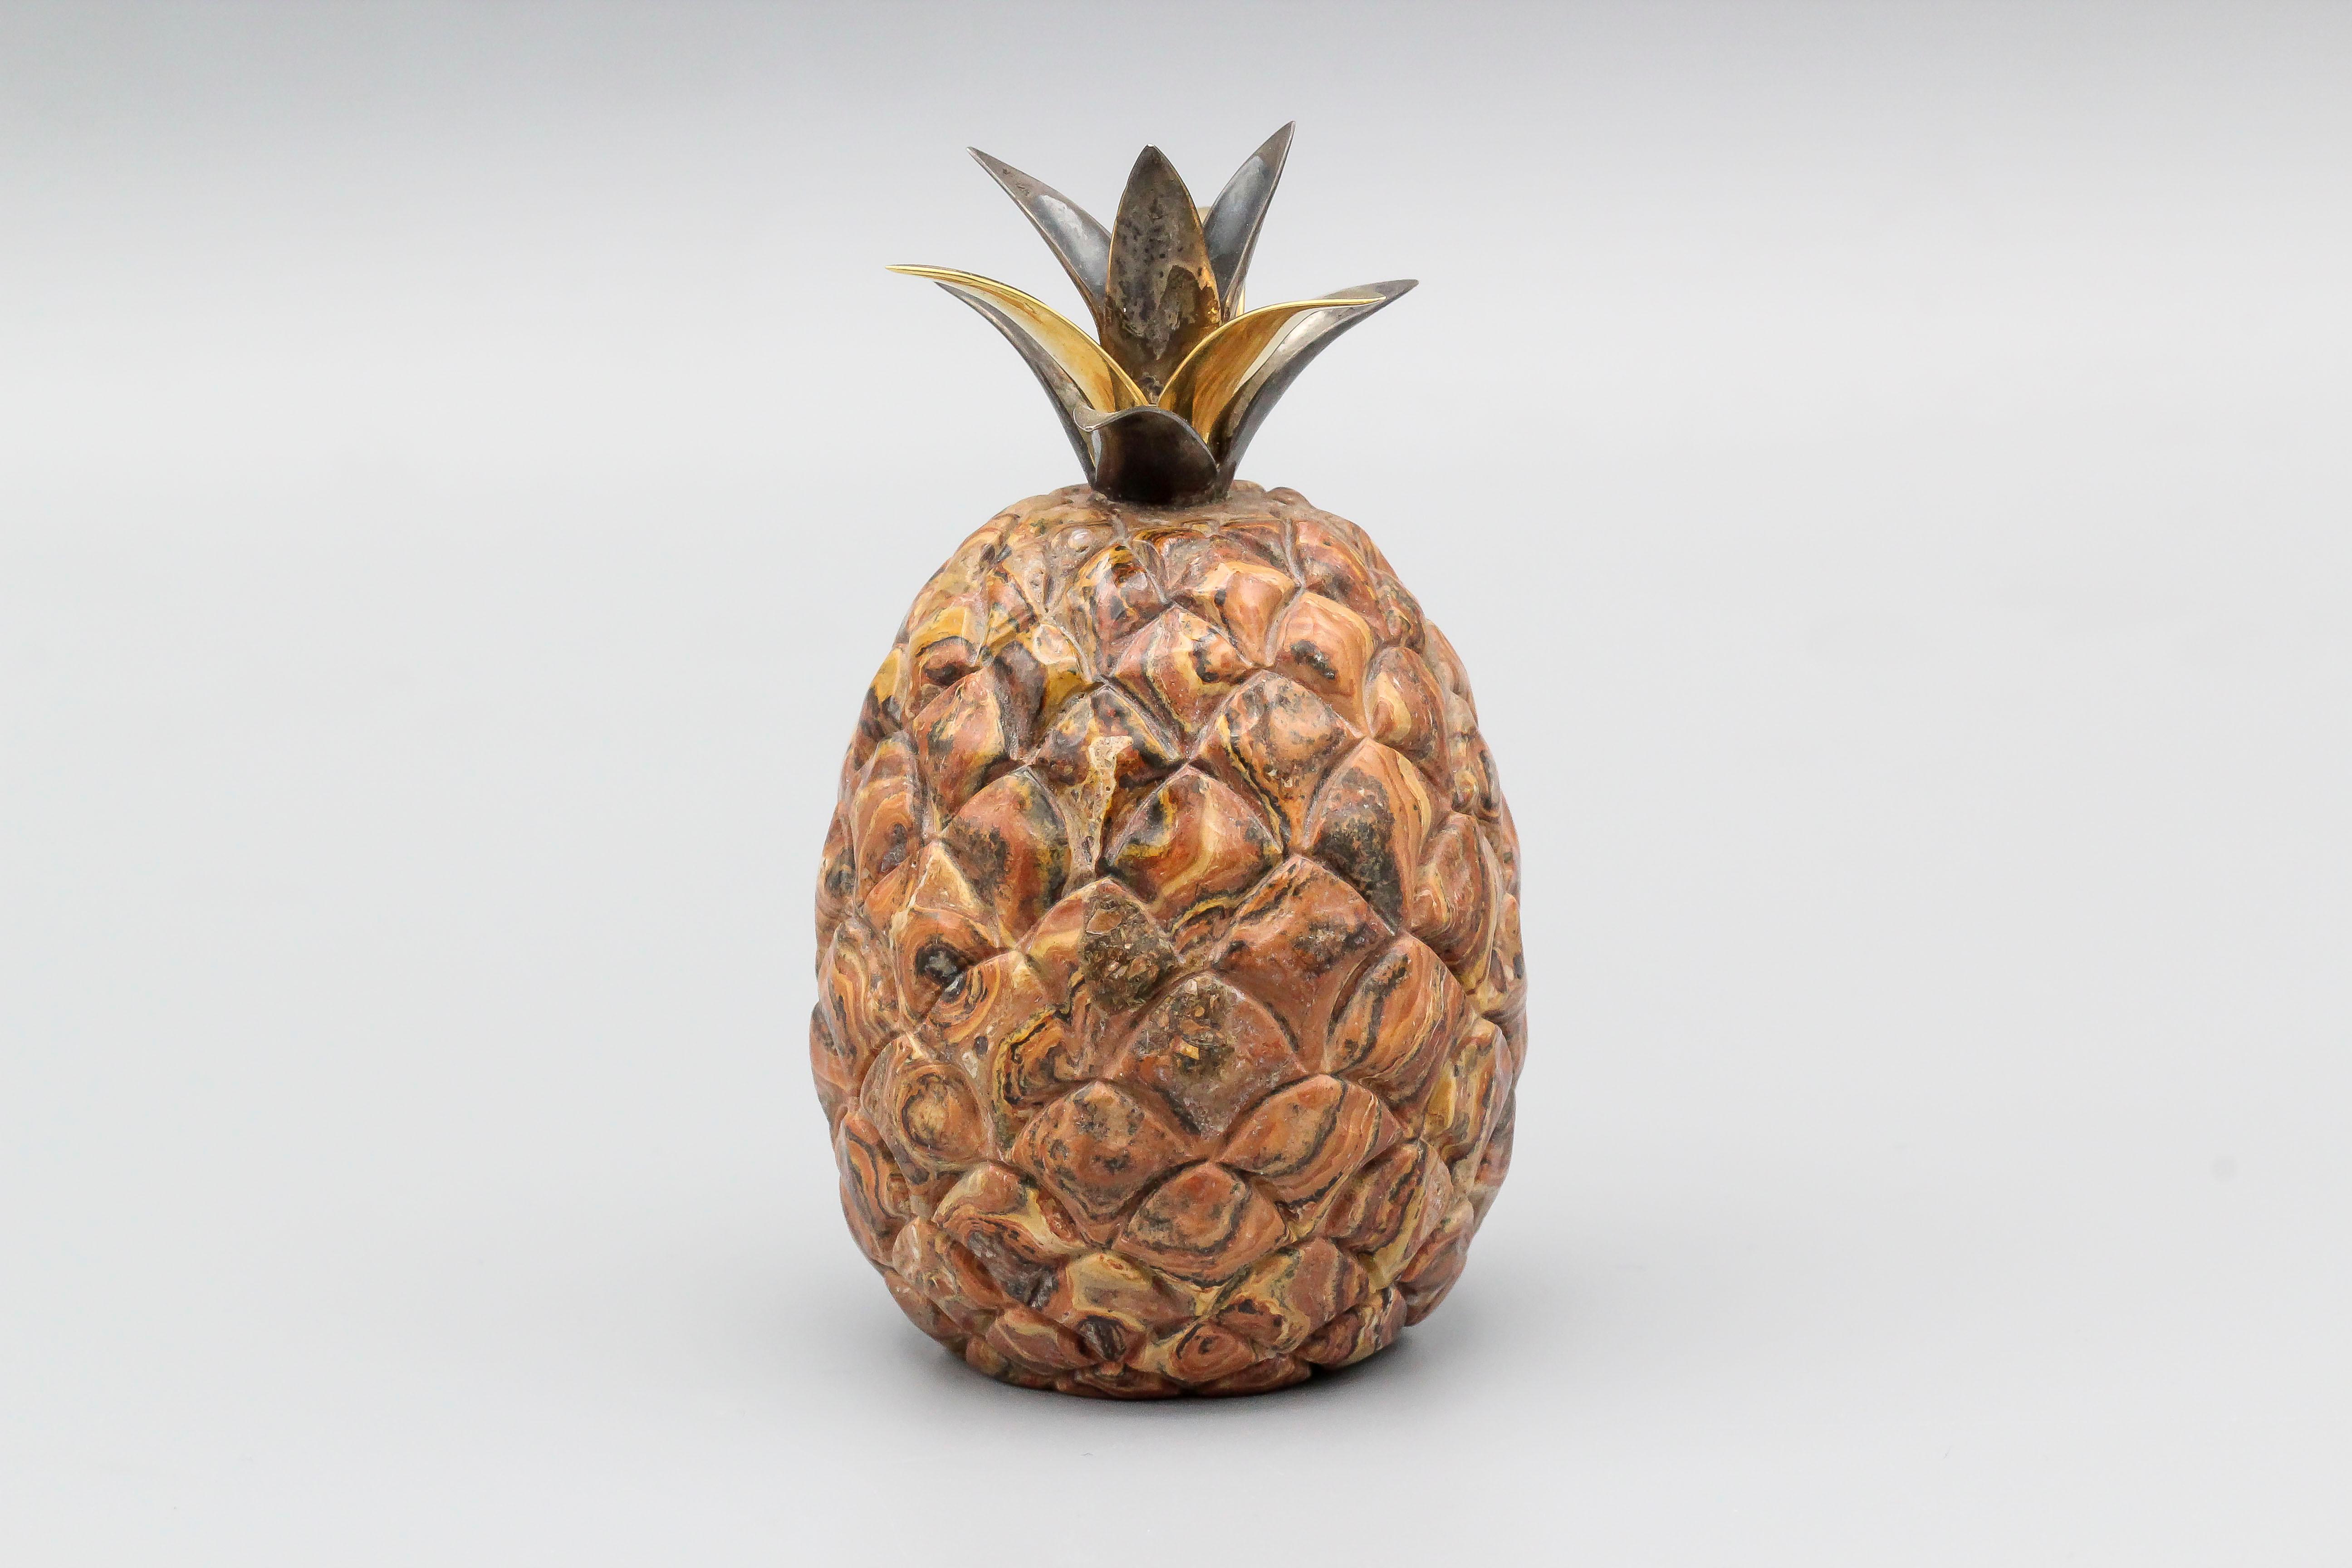 Fine petrified wood, silver, and 18k yellow gold pineapple paperweight by Vacheron Constantin. It resembles the actual fruit quite accurately, with gold and silver as the top leaves.

Hallmarks: Vacheron Constantin maker's mark, 750, 925.